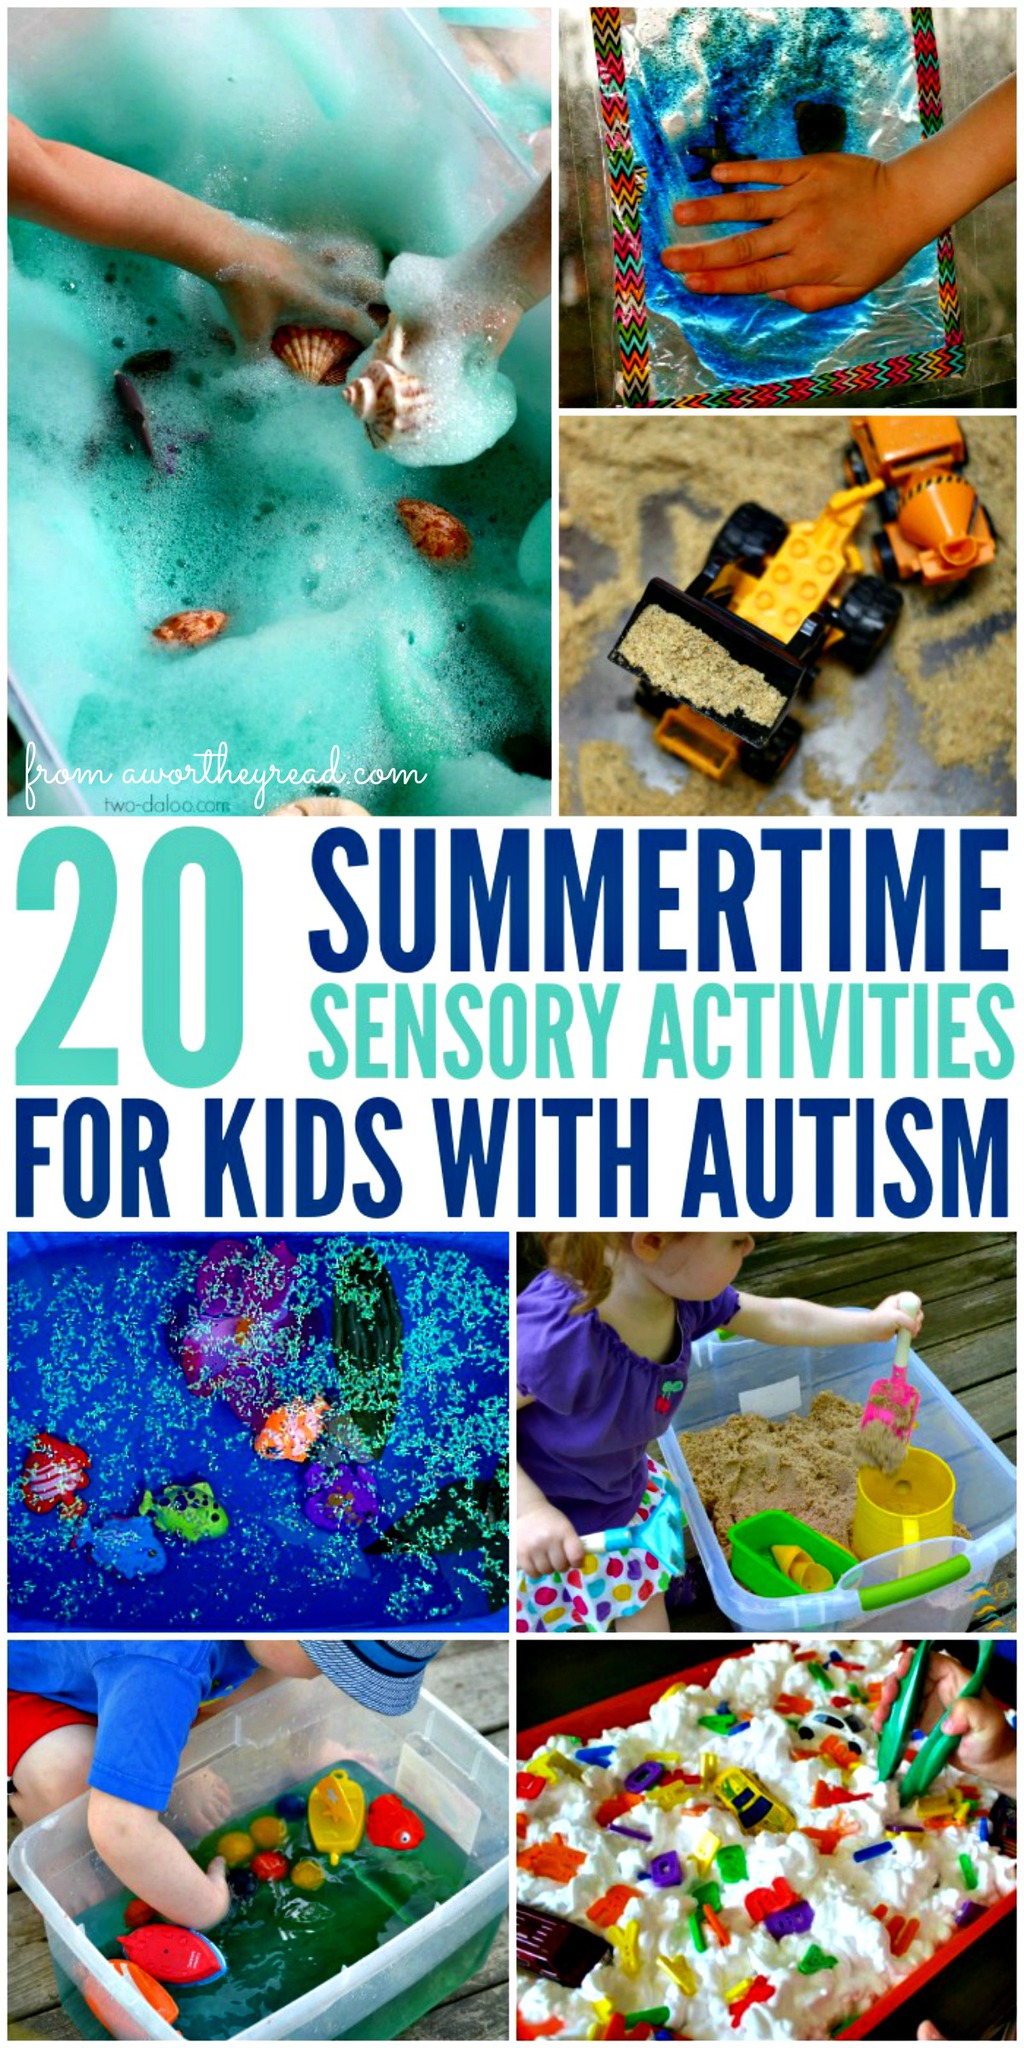 summertime-sensory-activities-for-kids-with-autism-autism